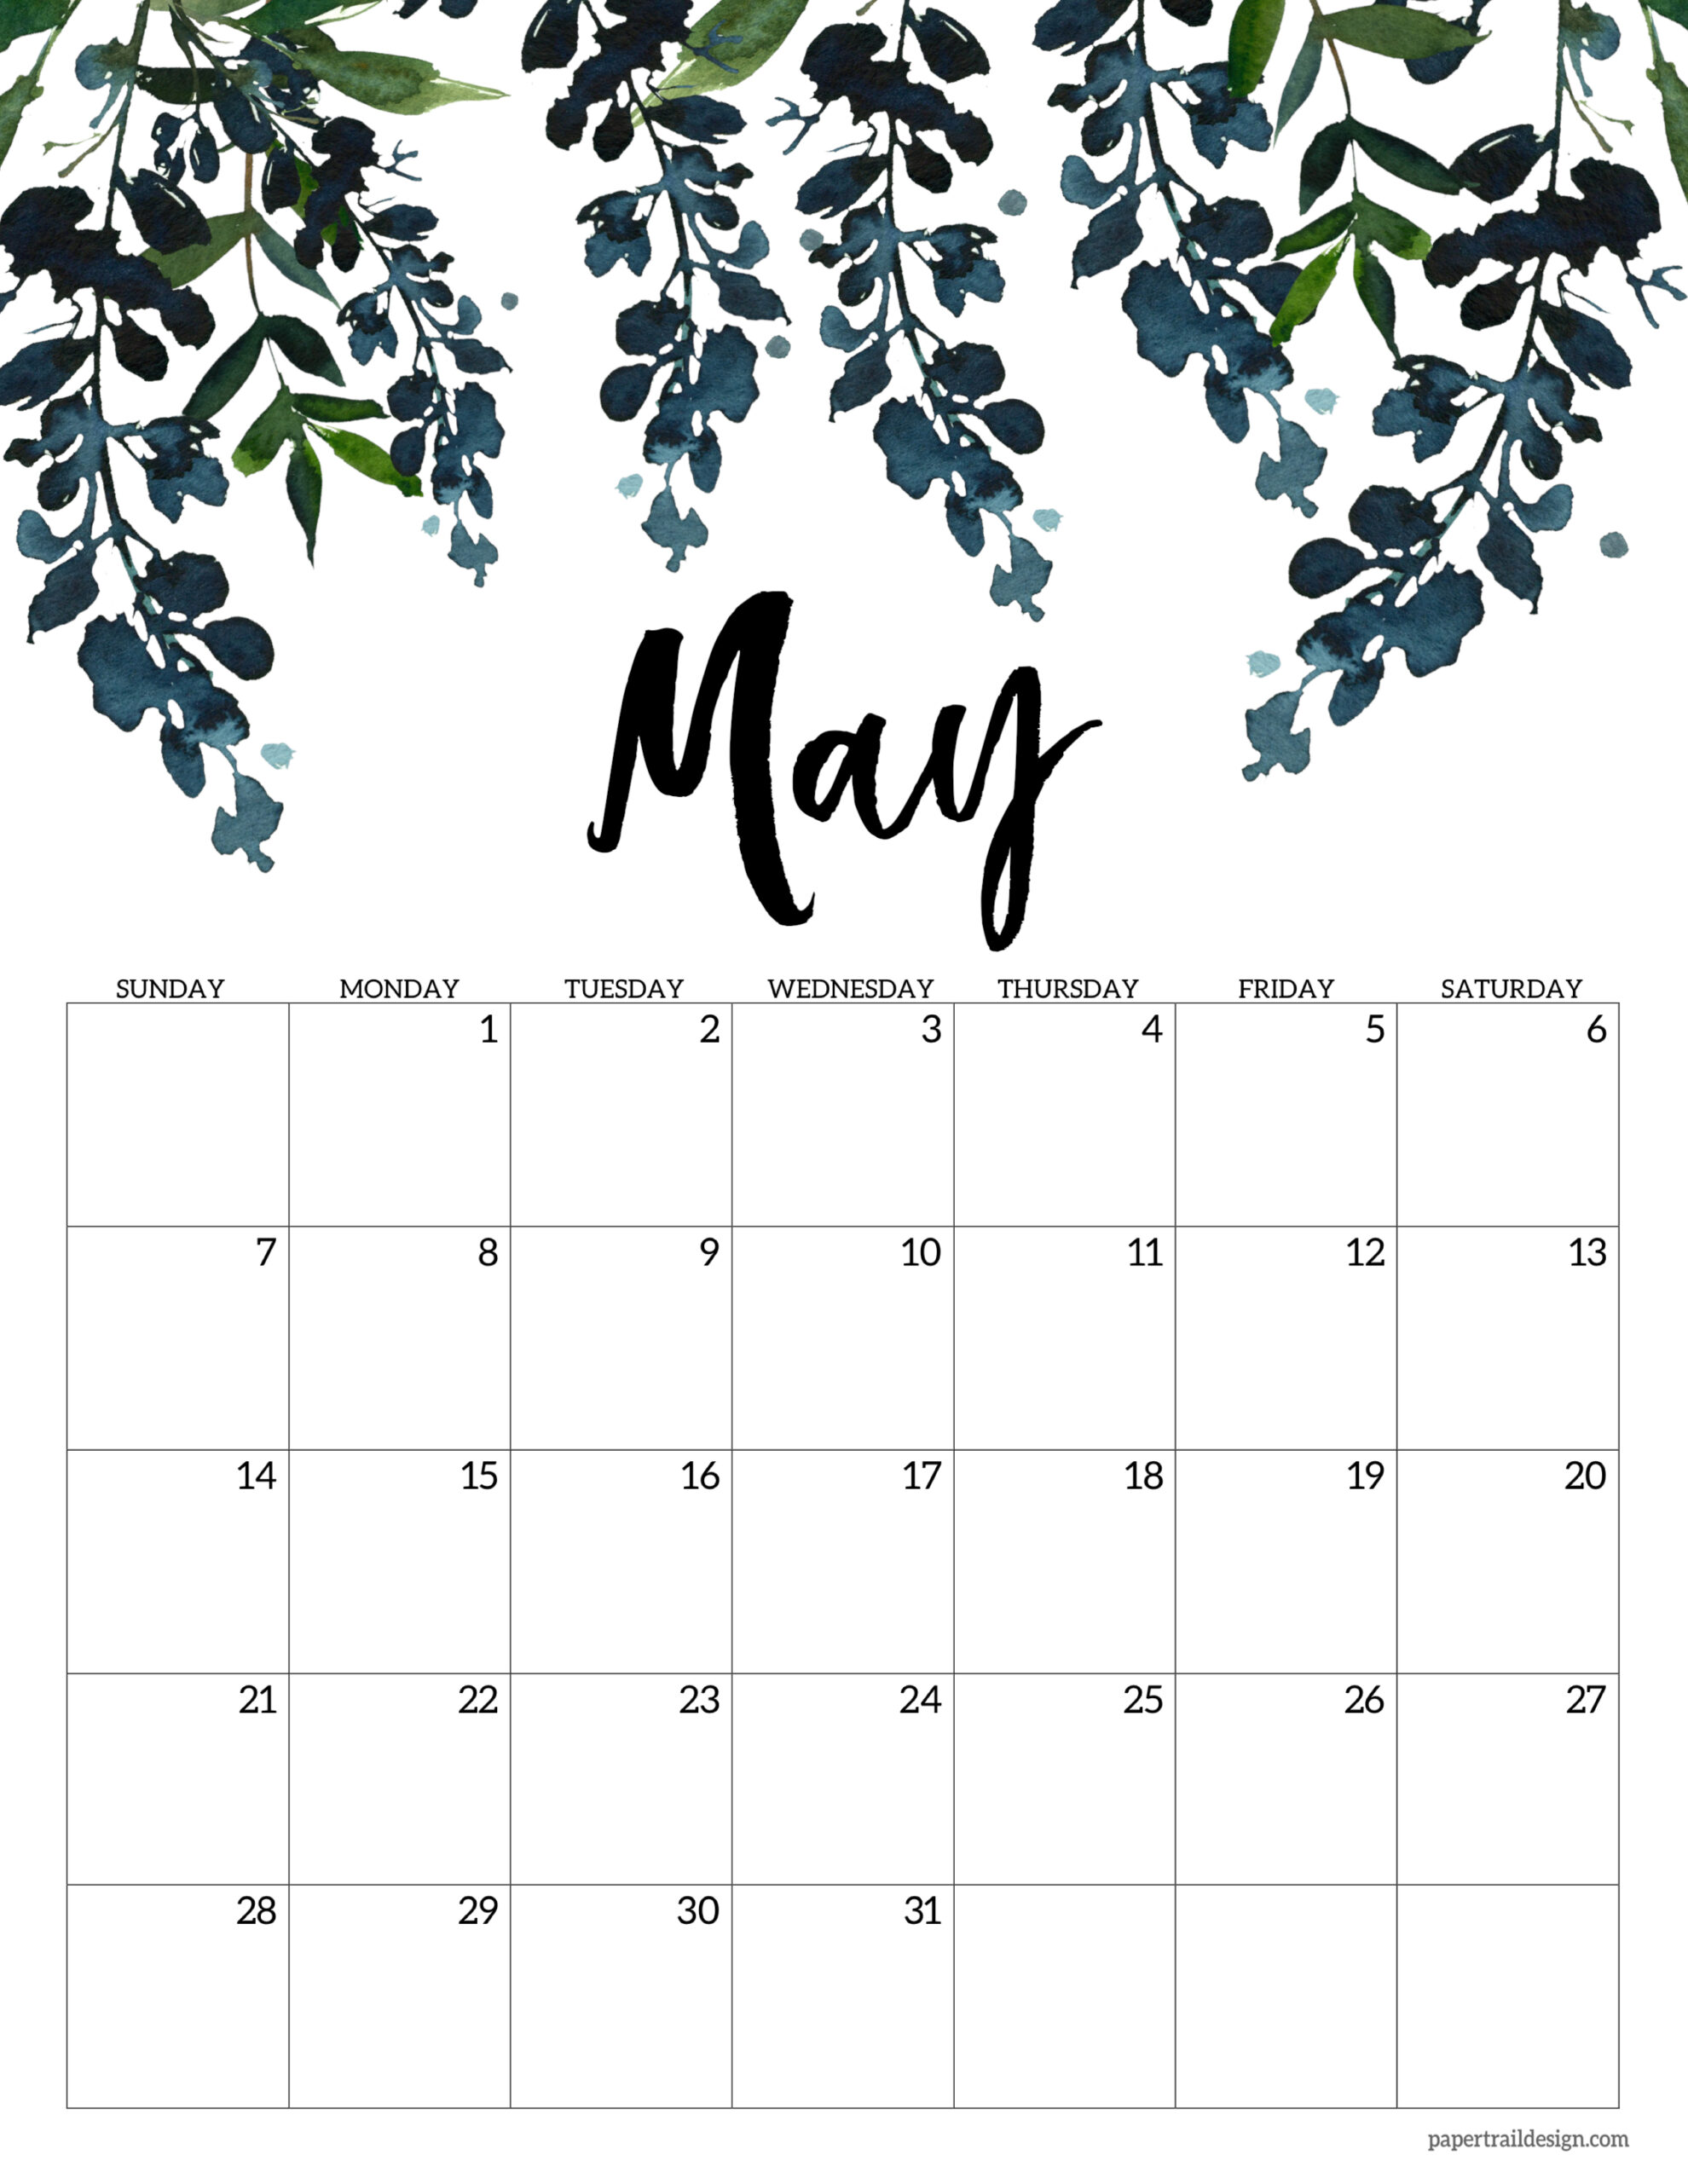 free-may-2020-printable-calendar-in-pdf-word-excel-with-holidays-may